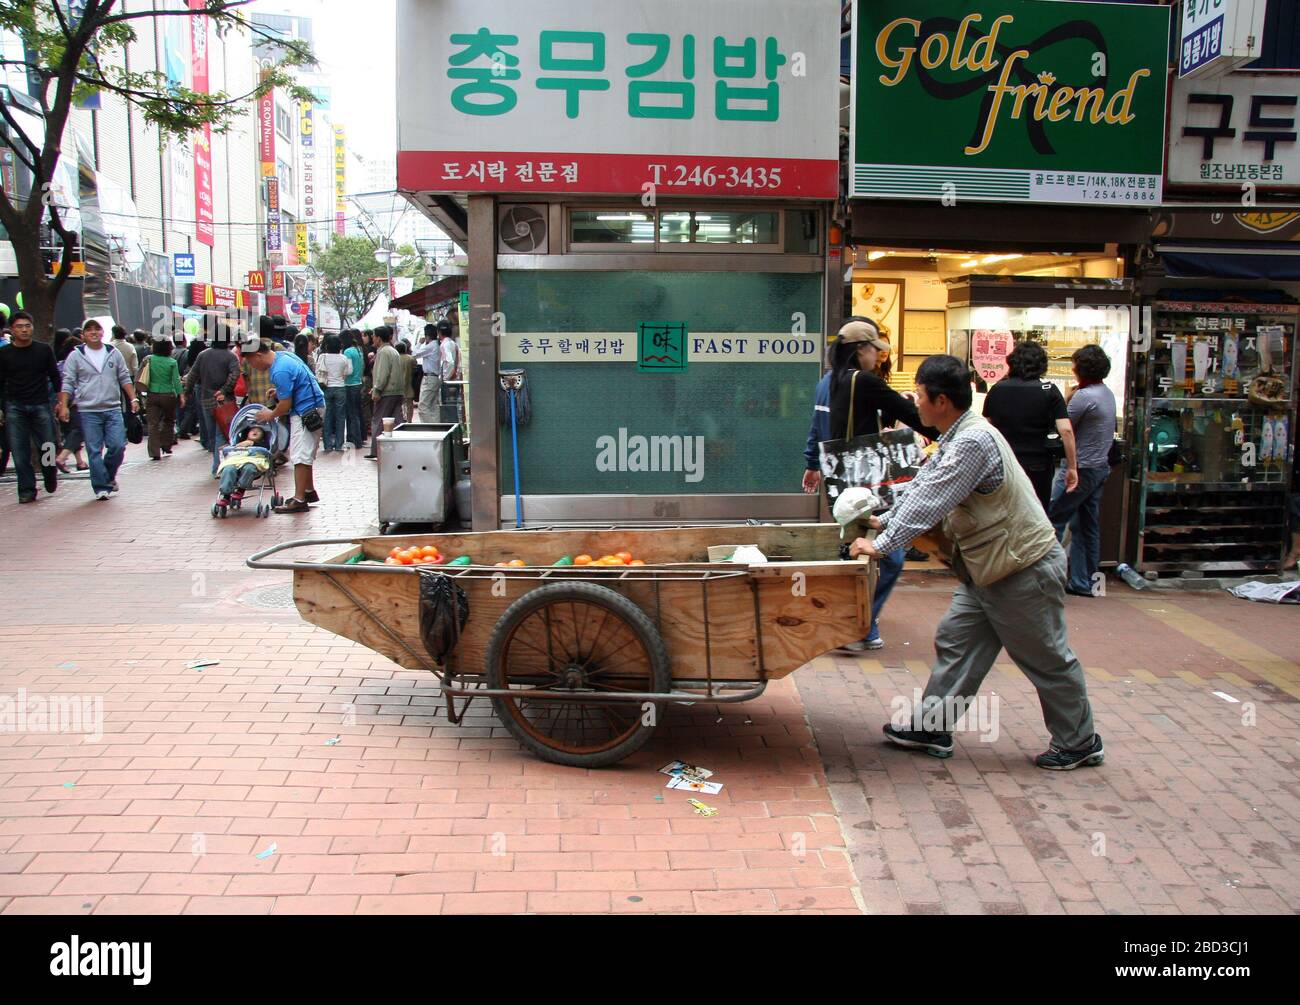 A man pushes a wheeled handcart full of fruit through the crowded streets of Busan, South Korea Stock Photo